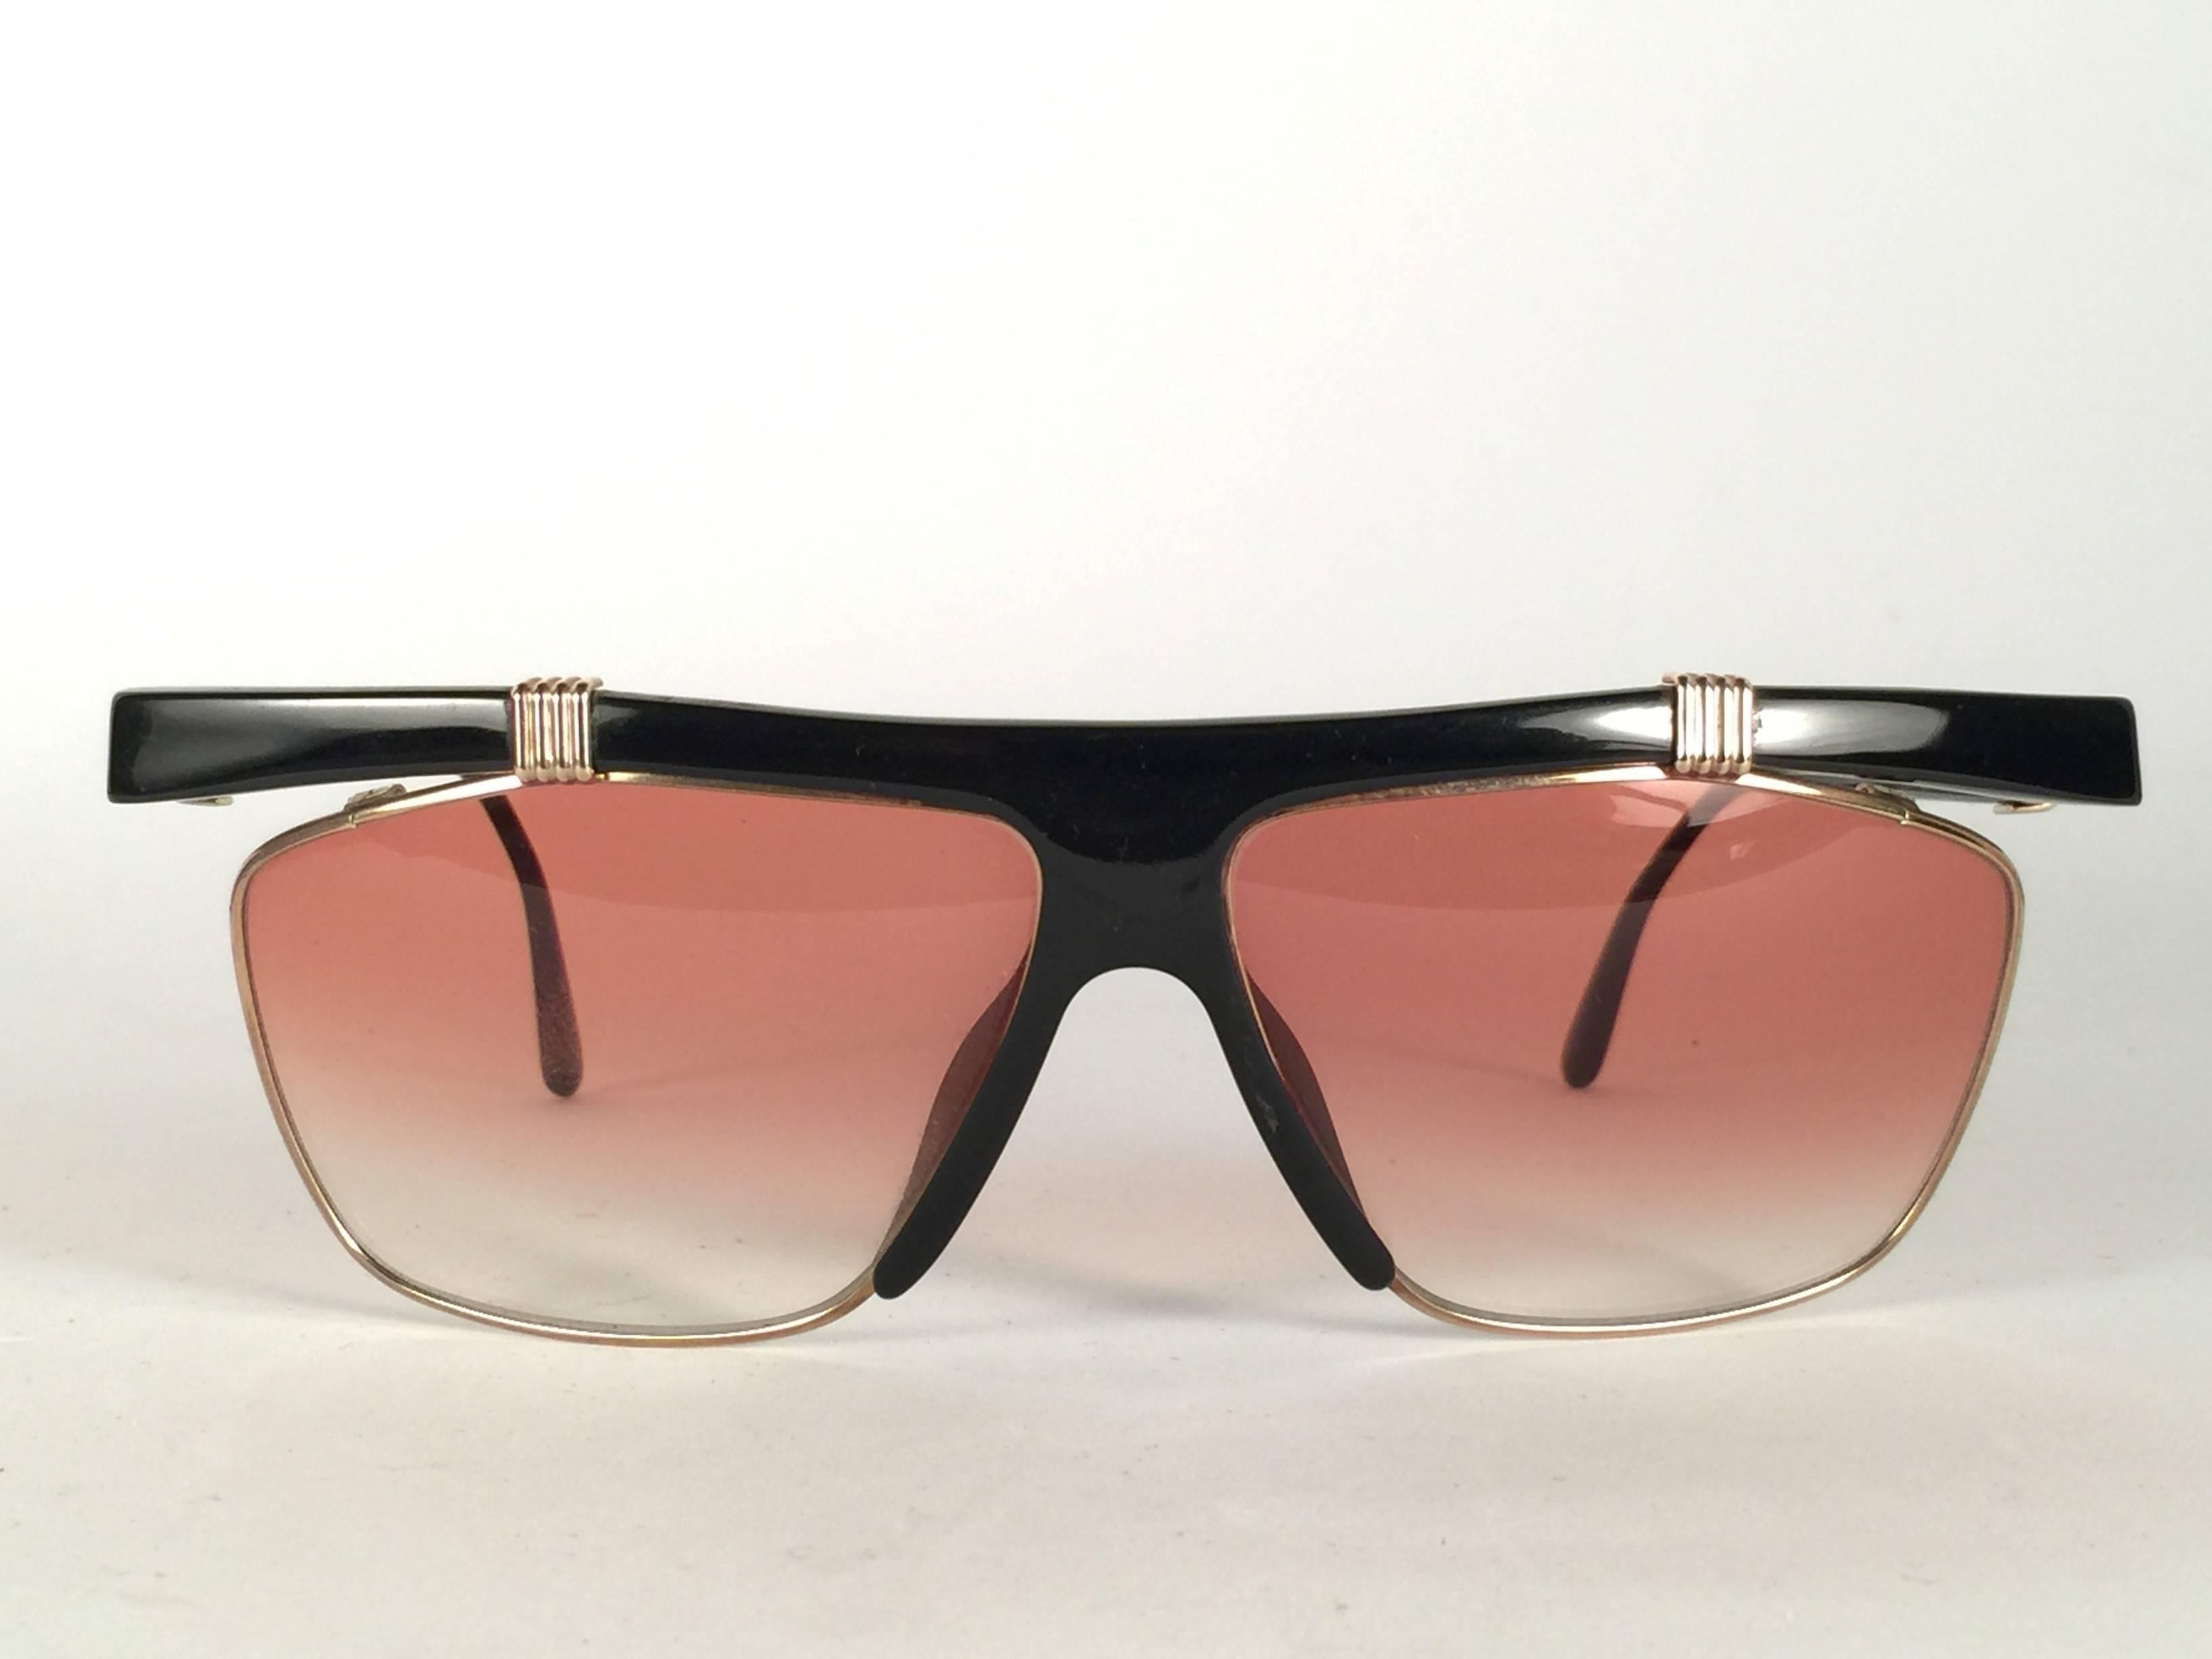 New Vintage Christian Dior 2555 Black frame with spotless light gradient lenses. 

Made in Germany. 

Produced and design in 1970's. Comes with its original silver Christian Dior Lunettes sleeve.